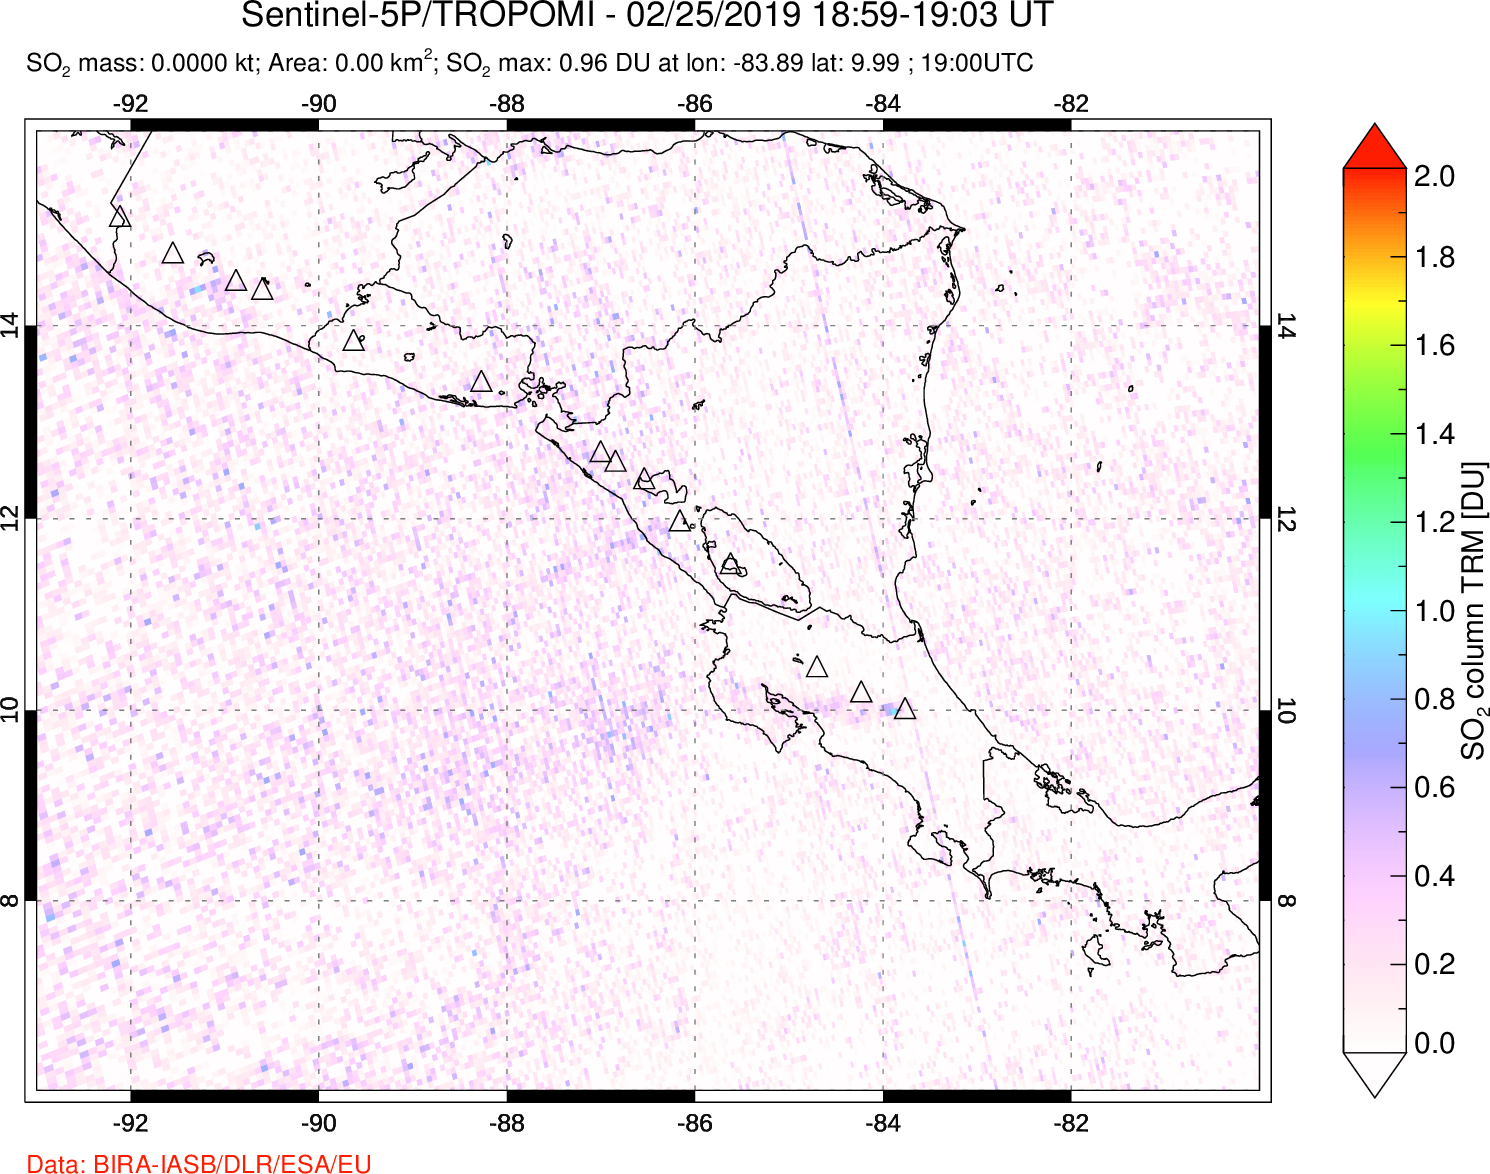 A sulfur dioxide image over Central America on Feb 25, 2019.